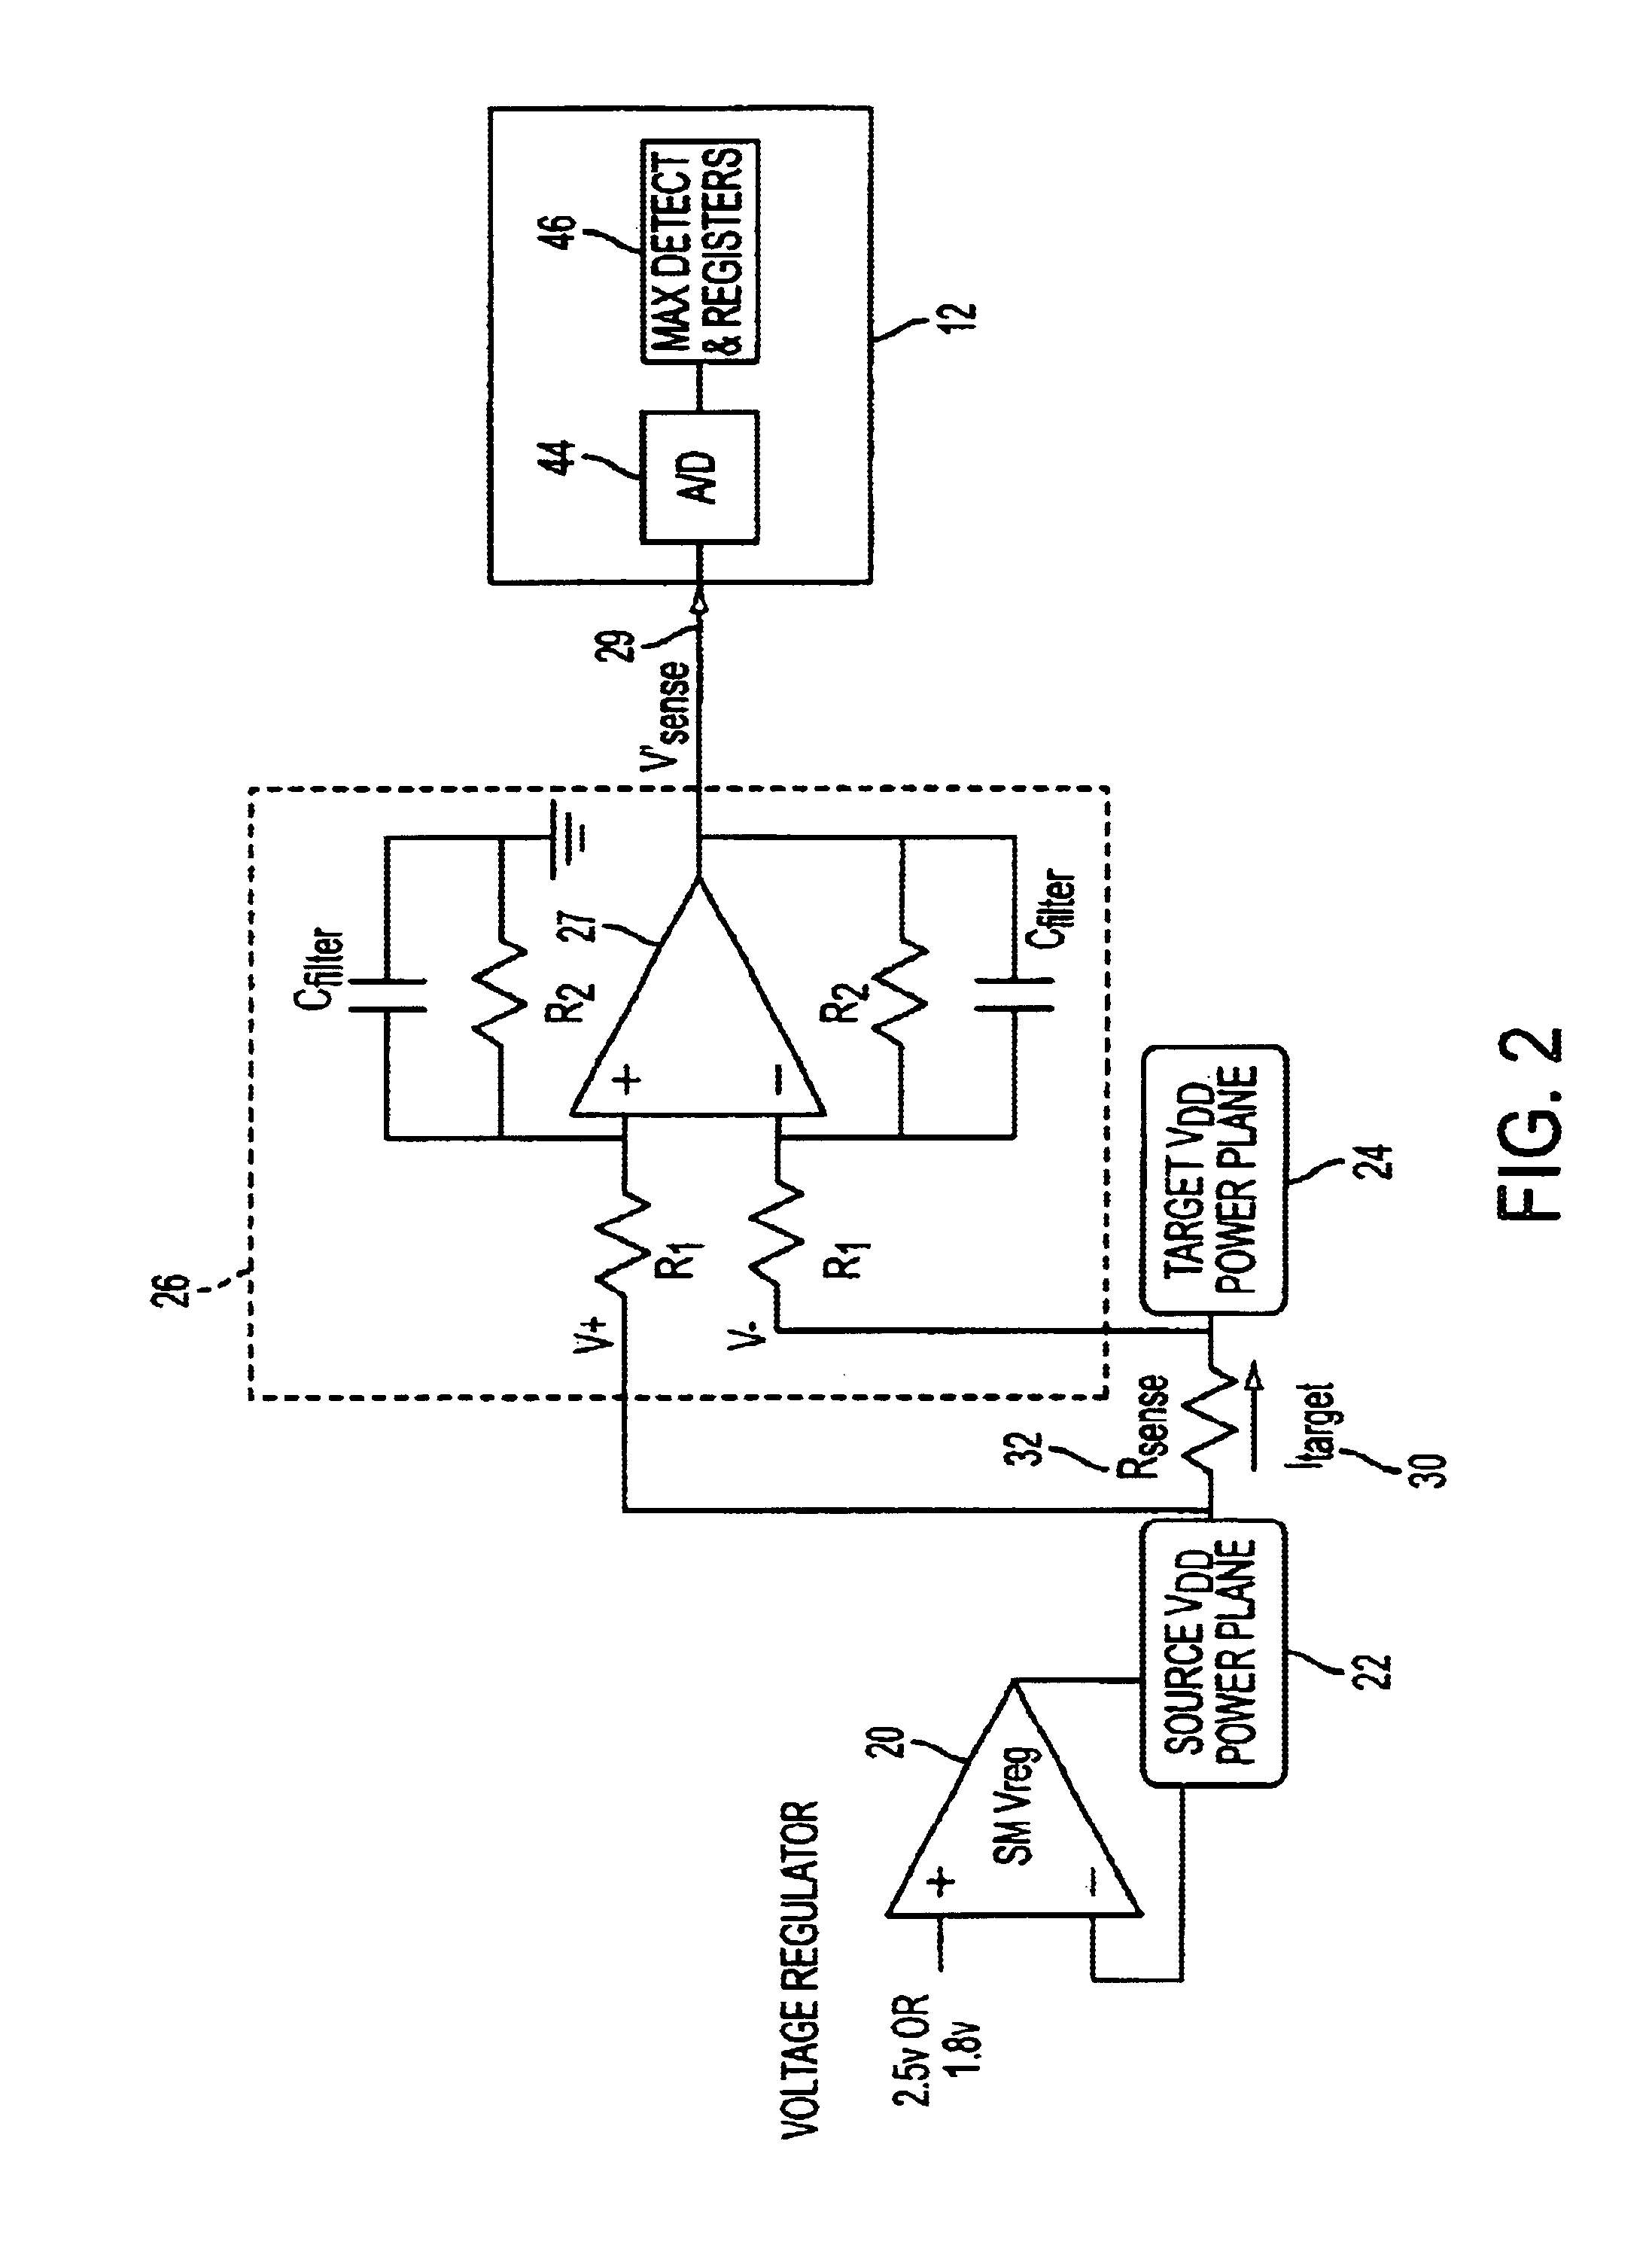 Memory system that measures power consumption